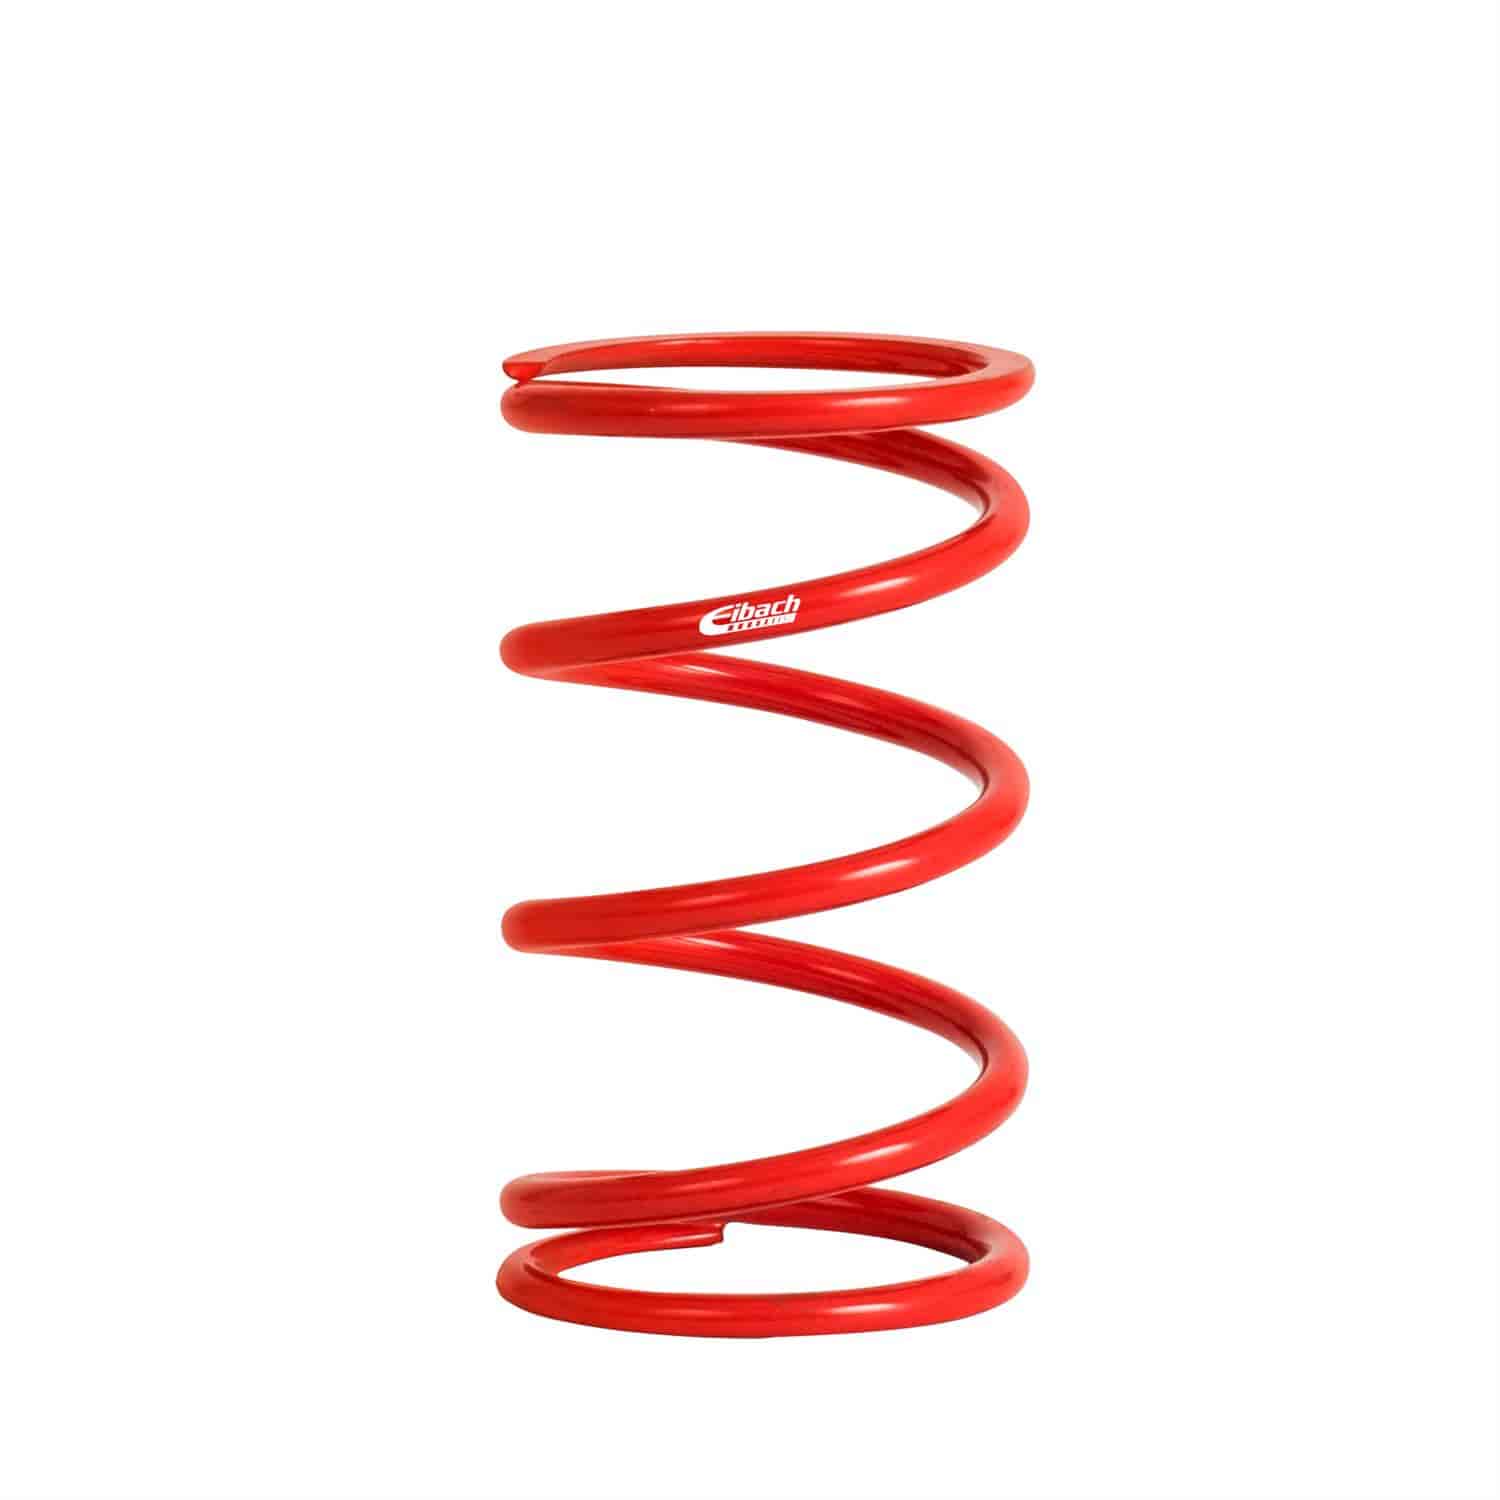 1050.550.0325 EIBACH CONVENTIONAL FRONT SPRING